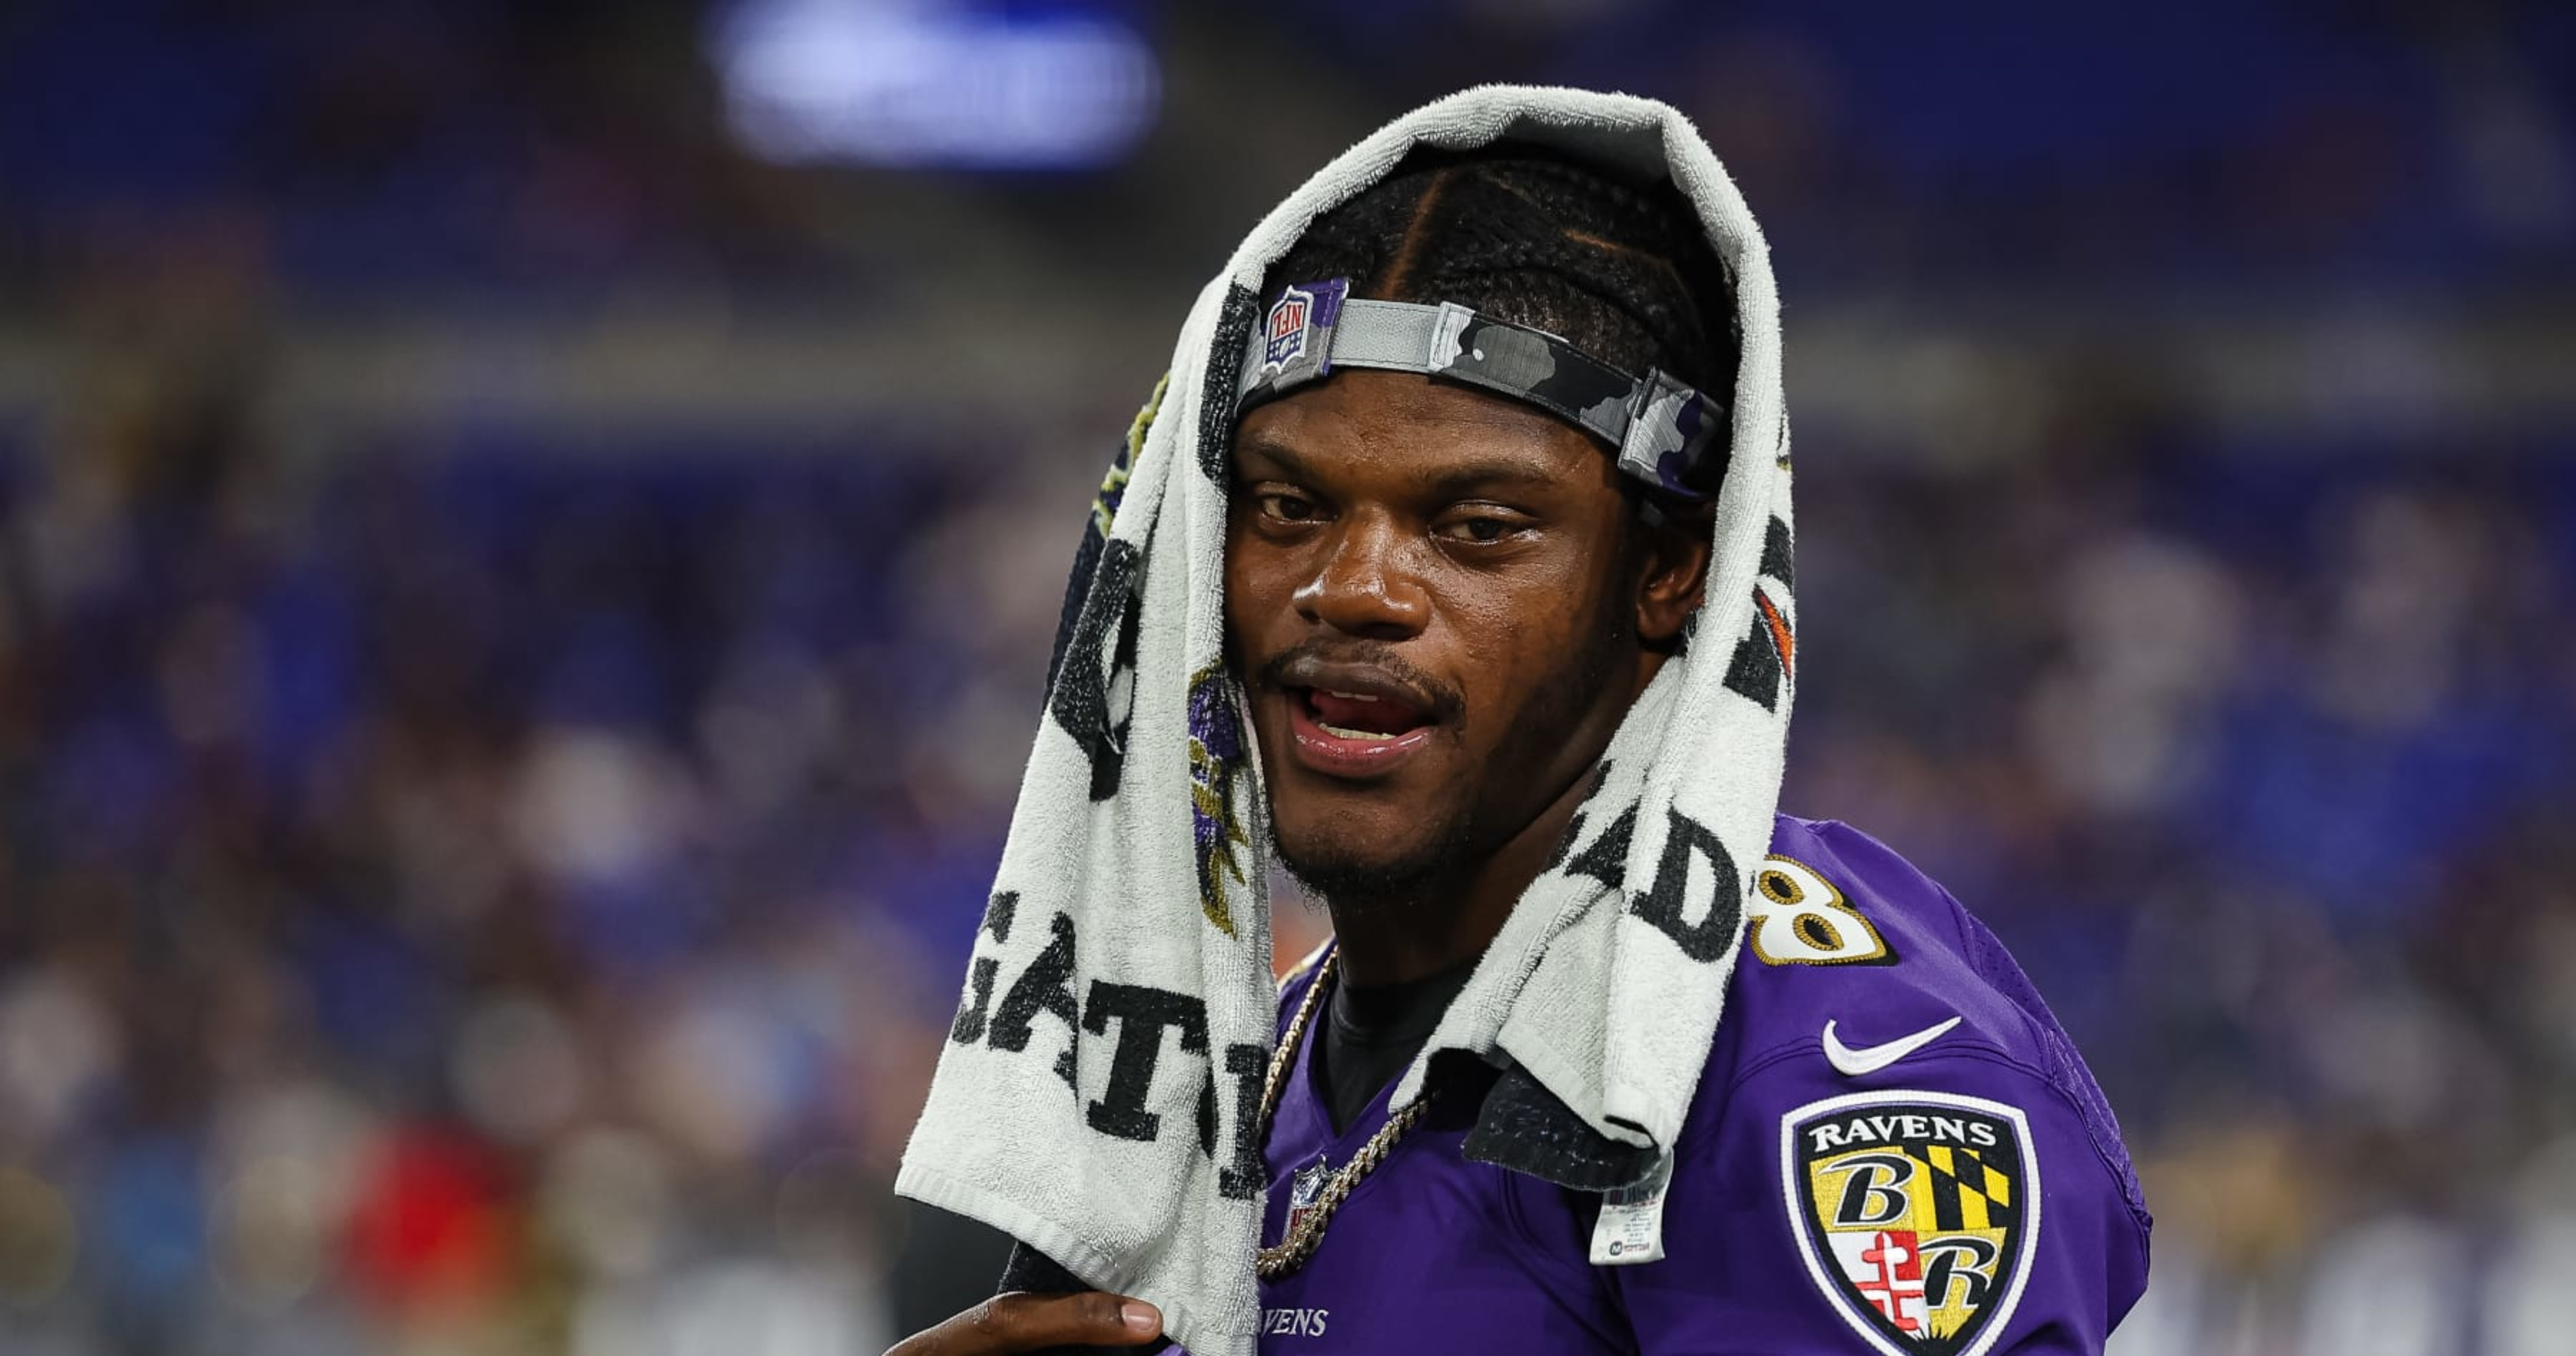 Ravens' Lamar Jackson Sets Week 1 as Deadline to Complete Contract Extension